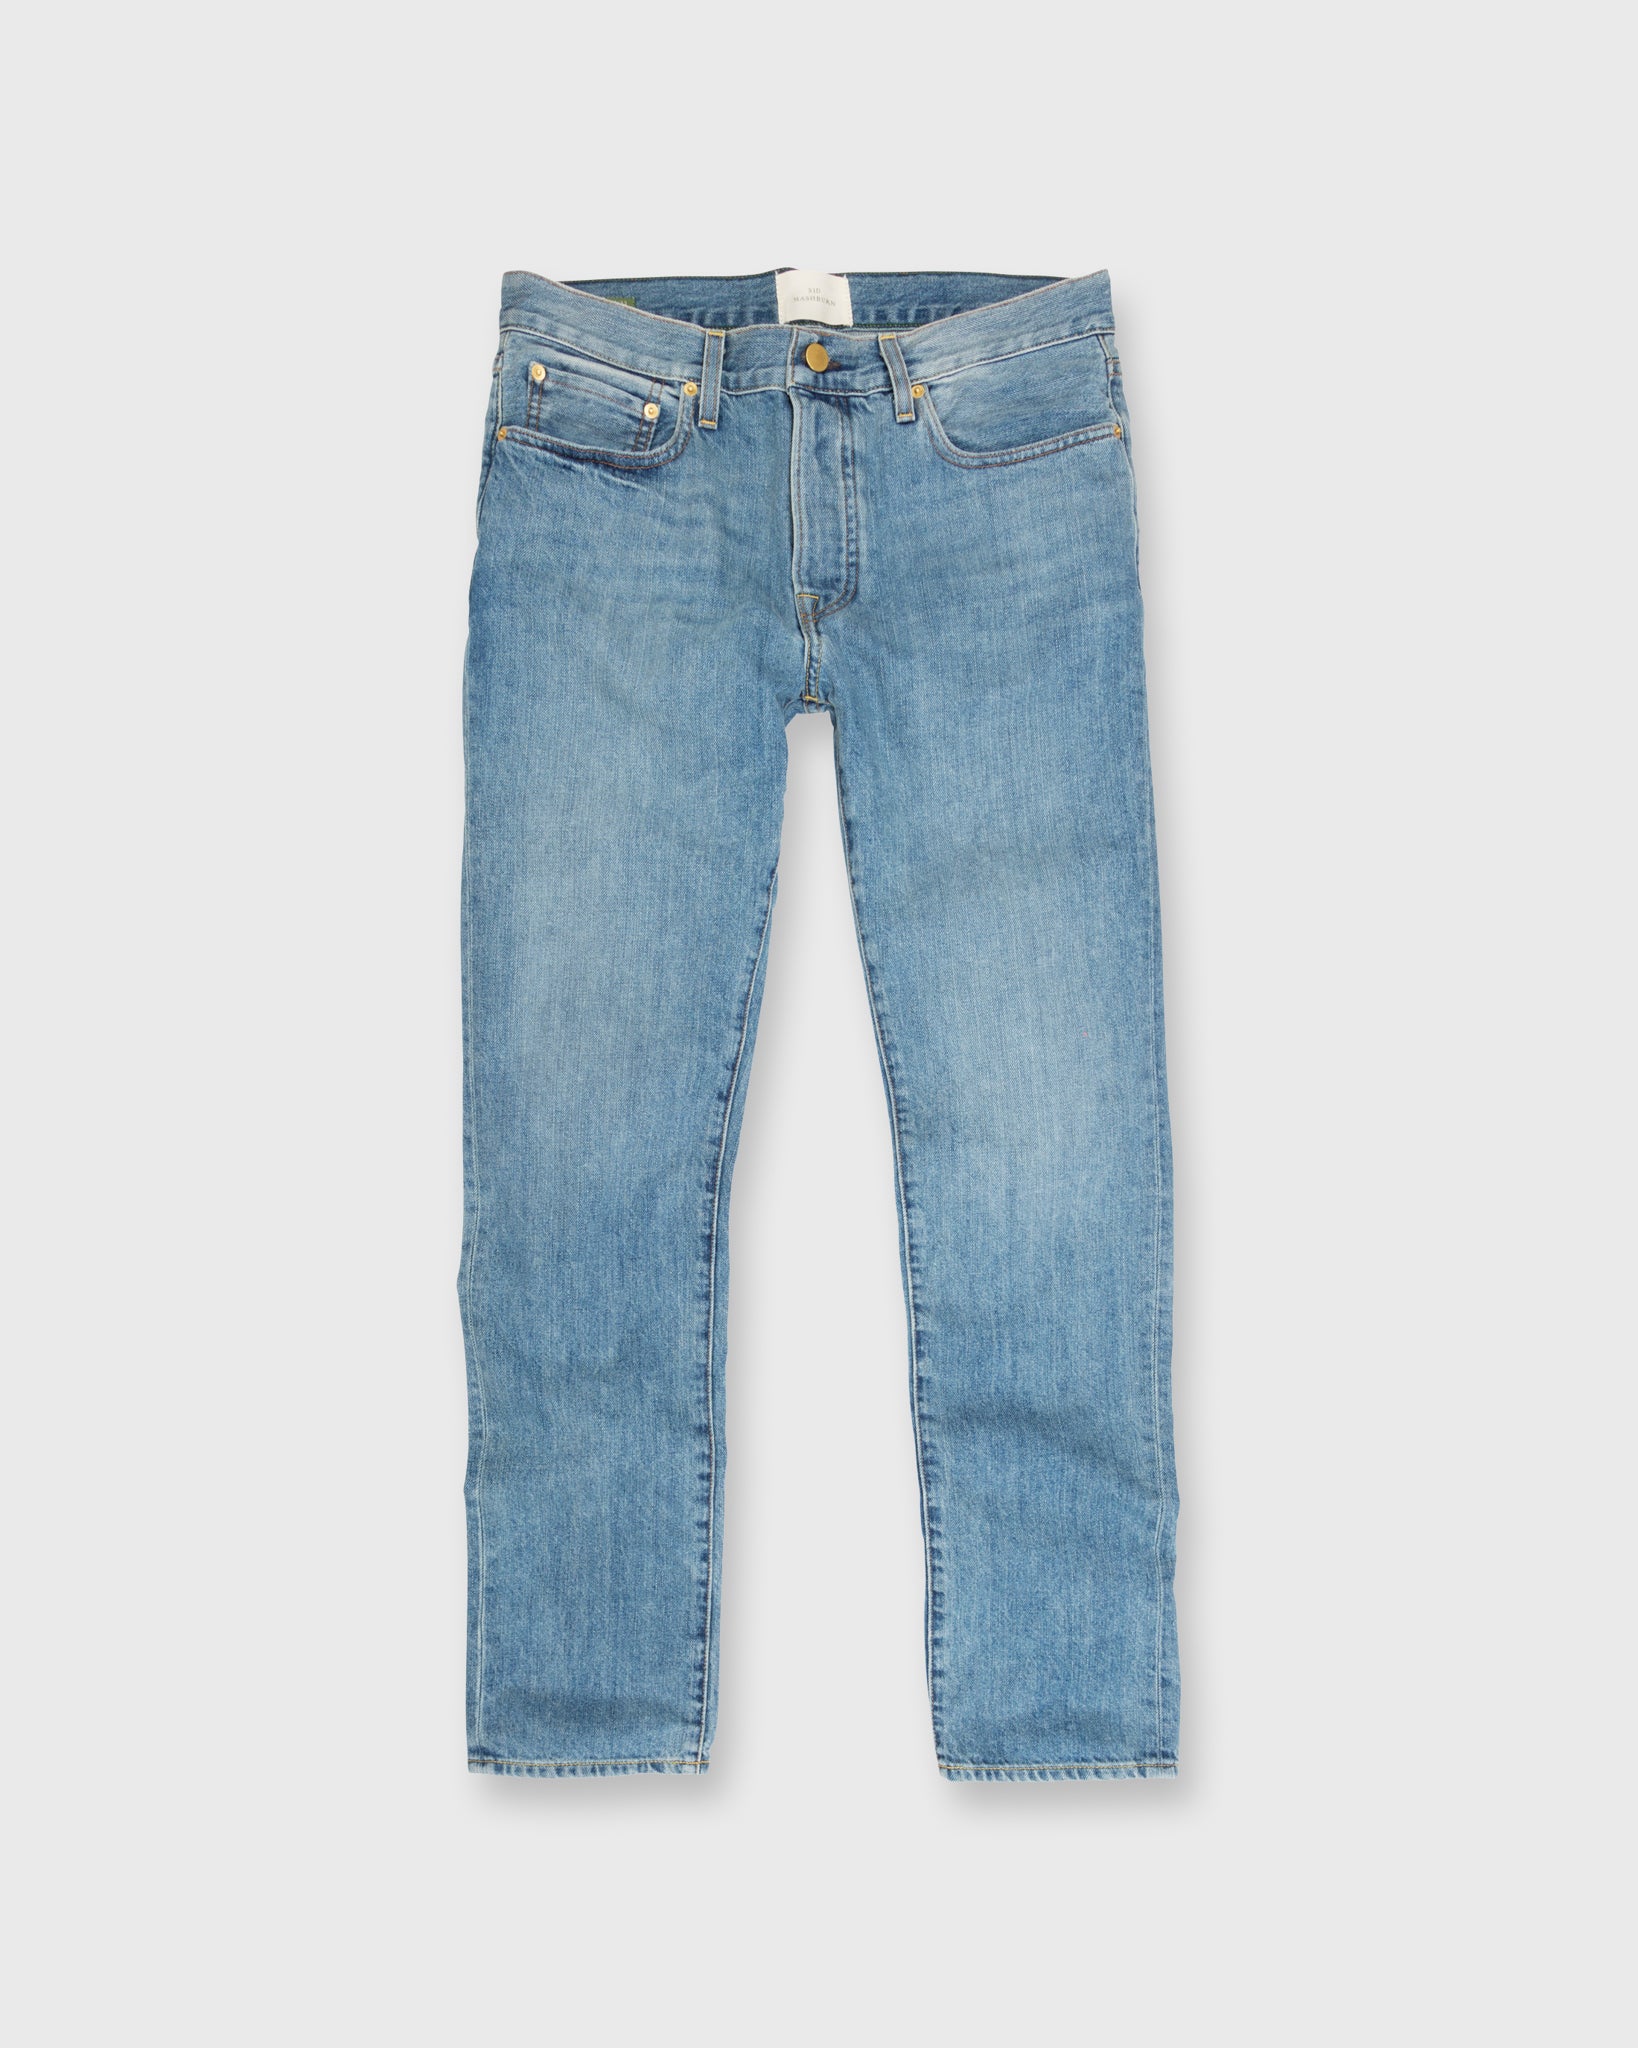 8 of the Best Summer Denim Pieces That Are Lightweight | Well+Good